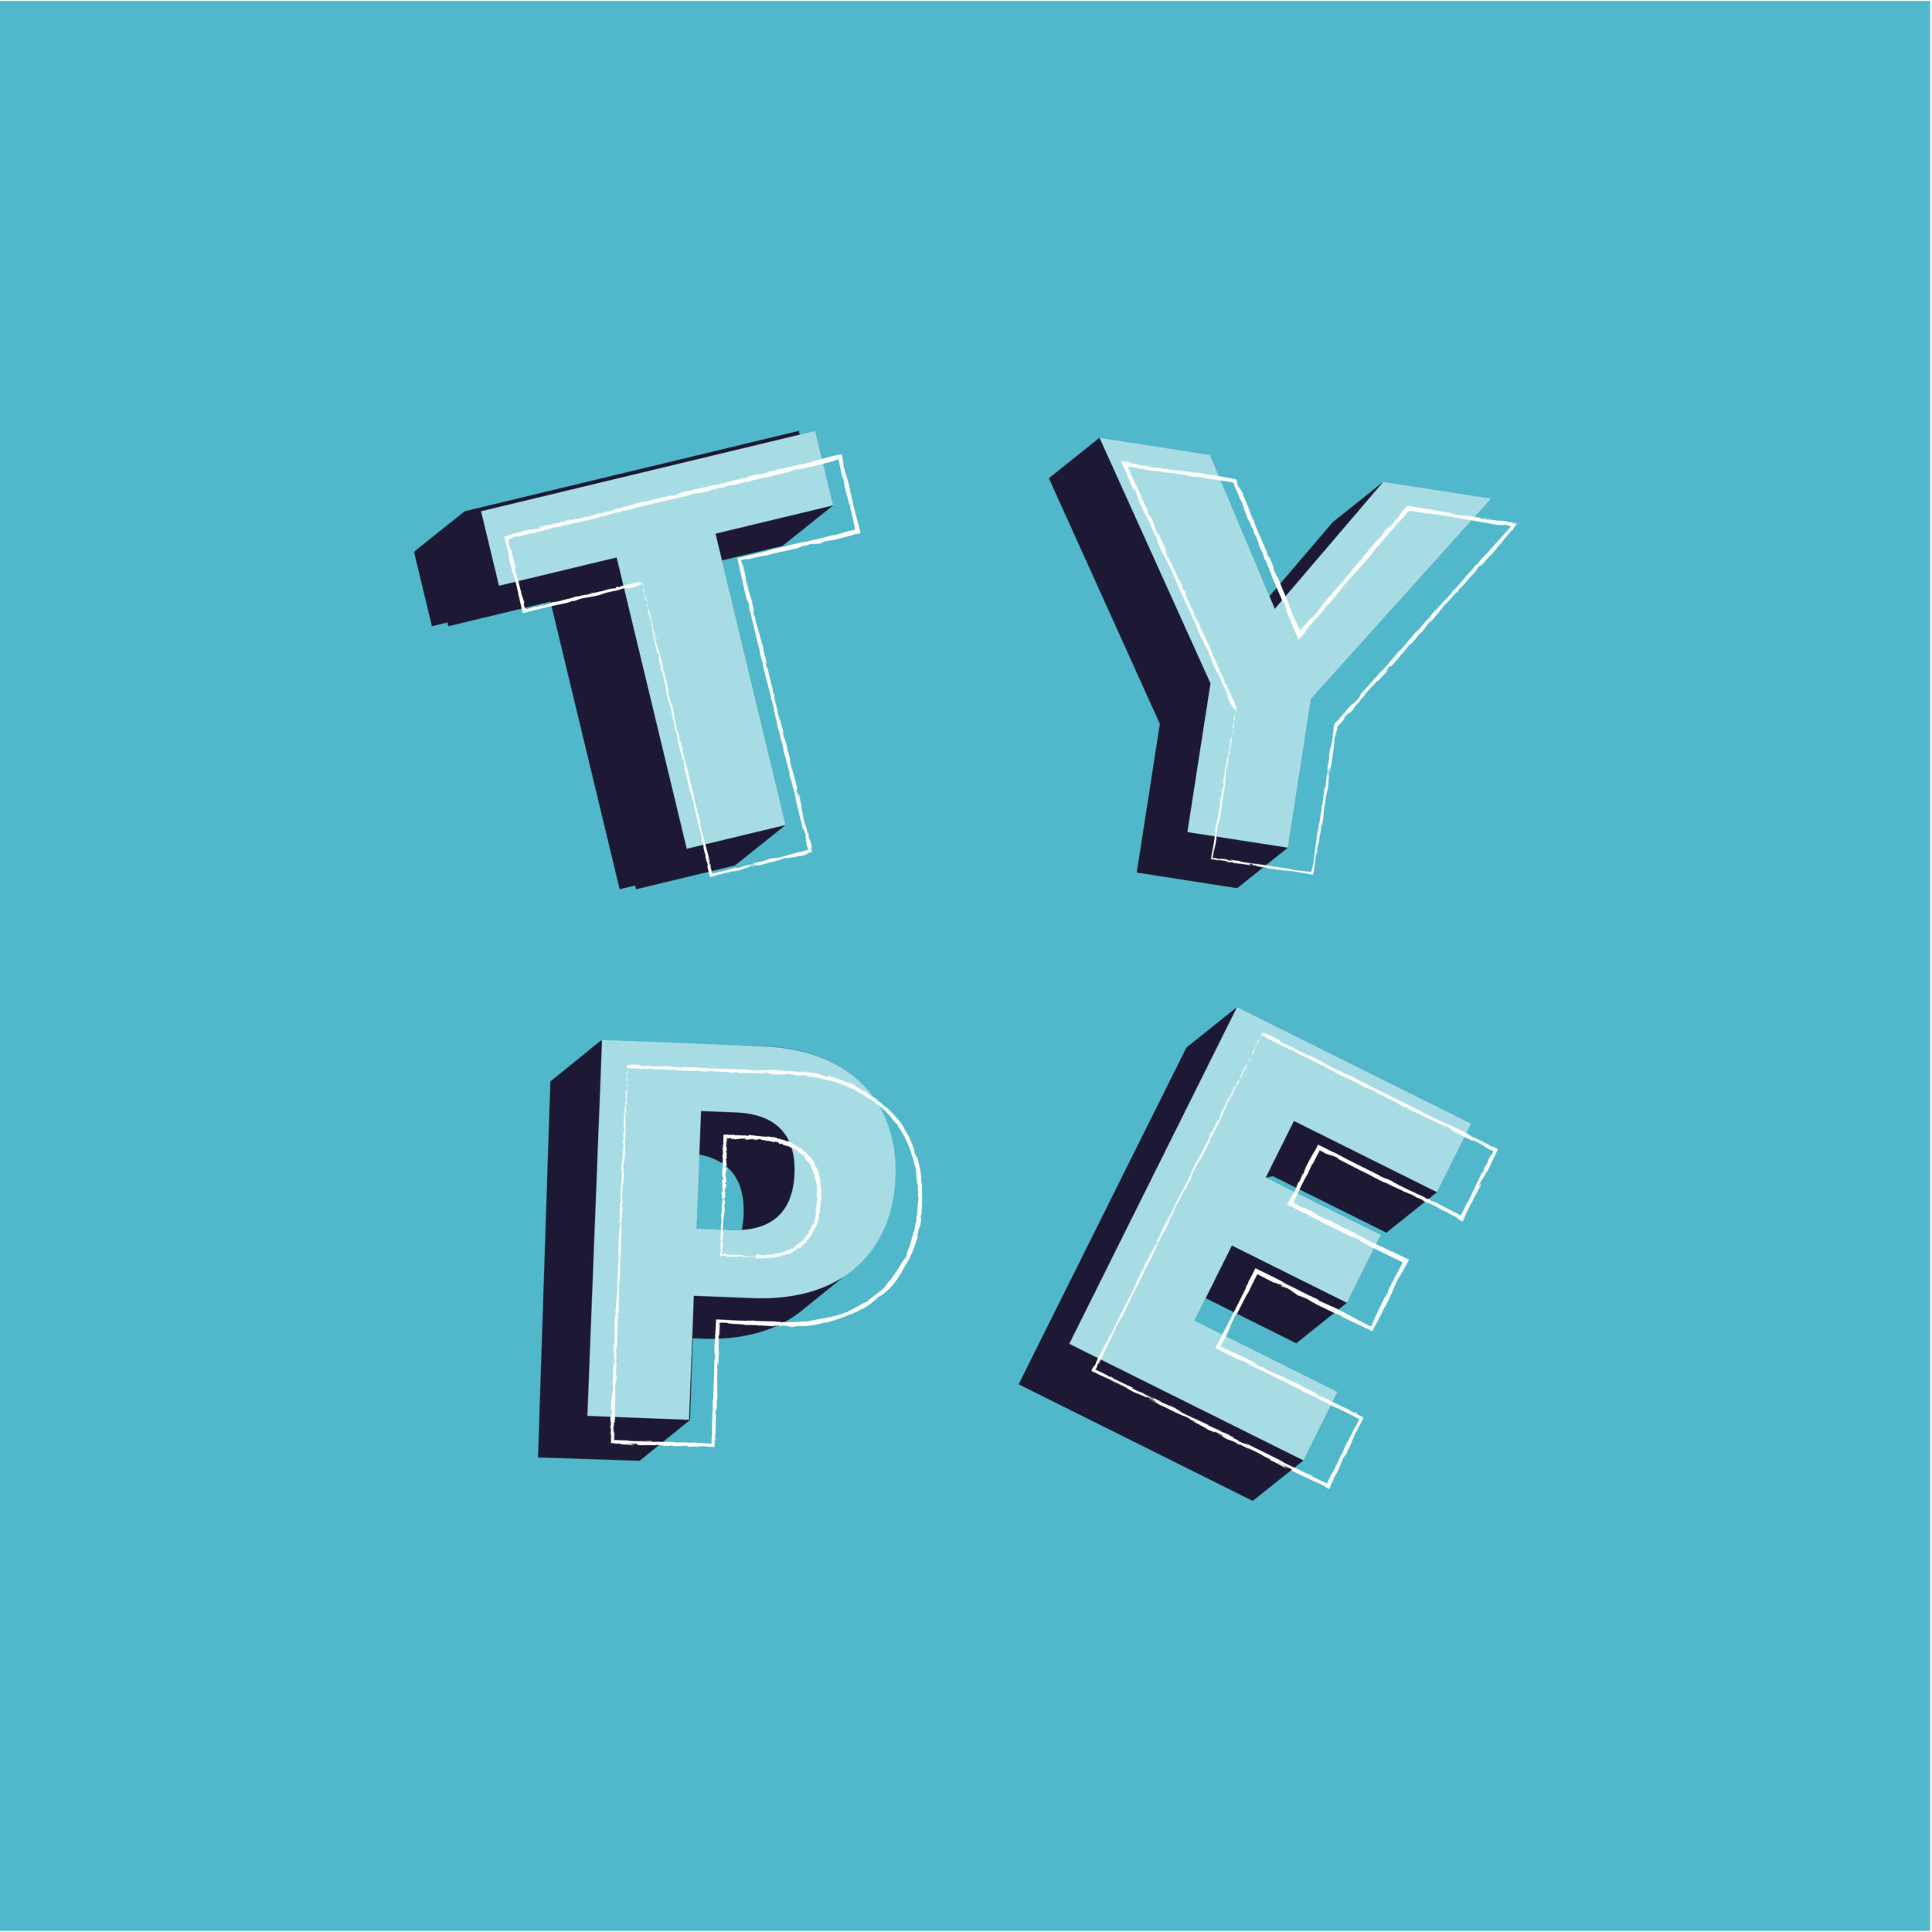 Type Matters Typography design and why it matters for your brand